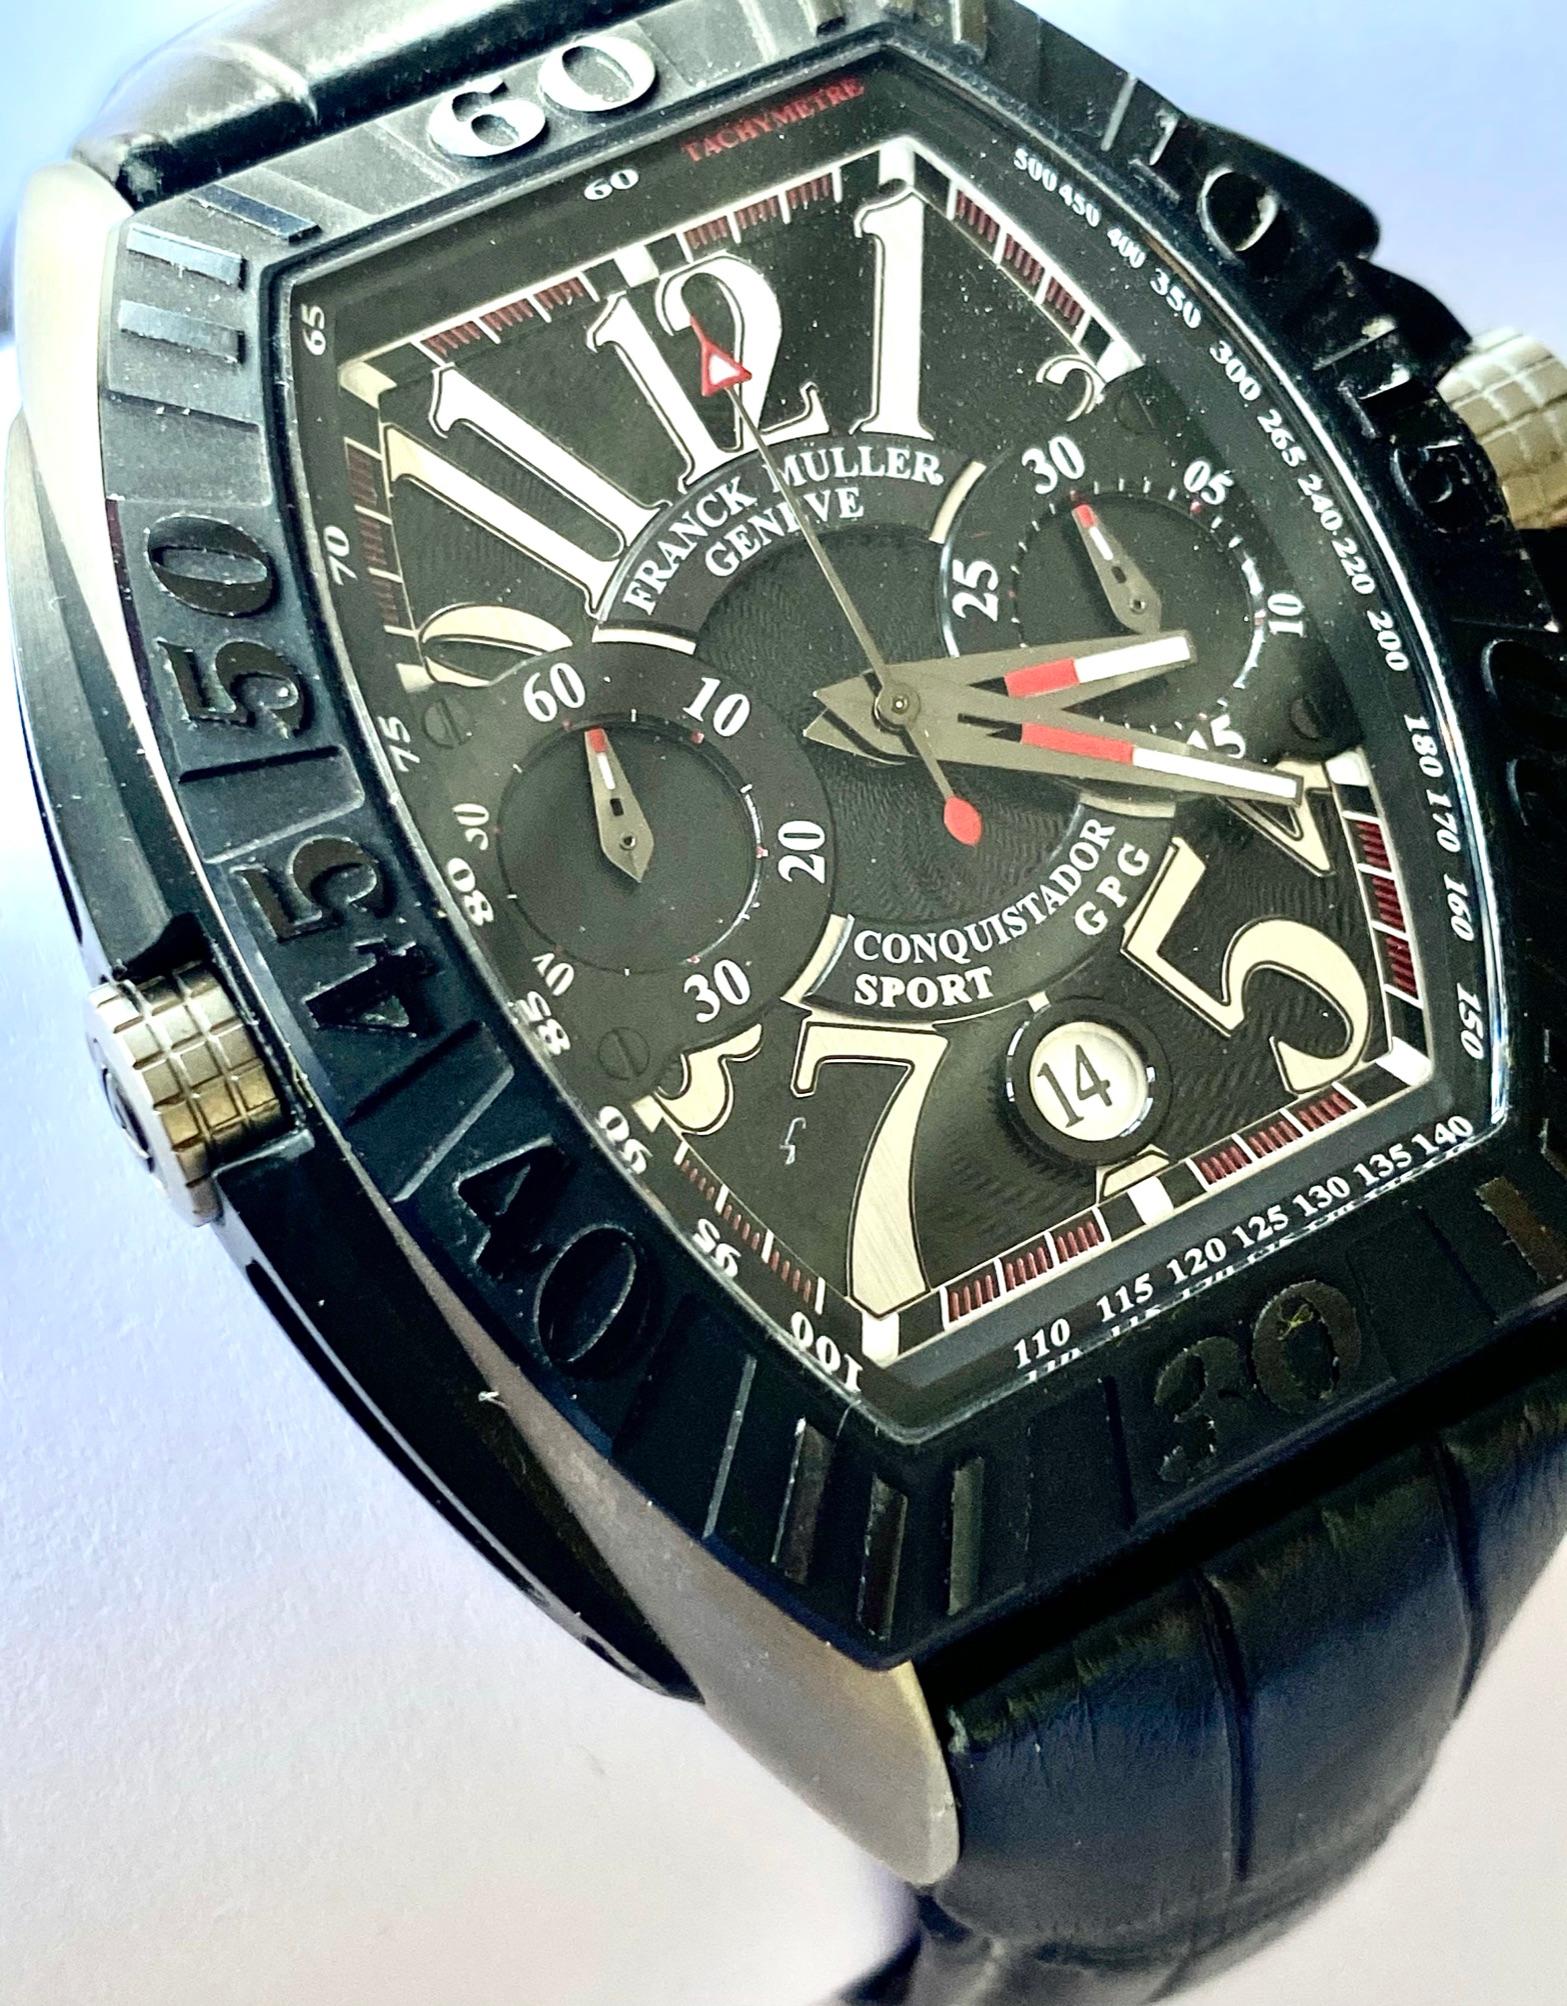 One. (1) Titanium GP Sports Watch with Chono function.
Brand: FRANCK MULLER  model nr: 8900 CC GP
New watch with cerificate and box Frank Muller  and original Franck Muller garantee
Kroko strap leather
Sice:   45 x 38 x 14 mm